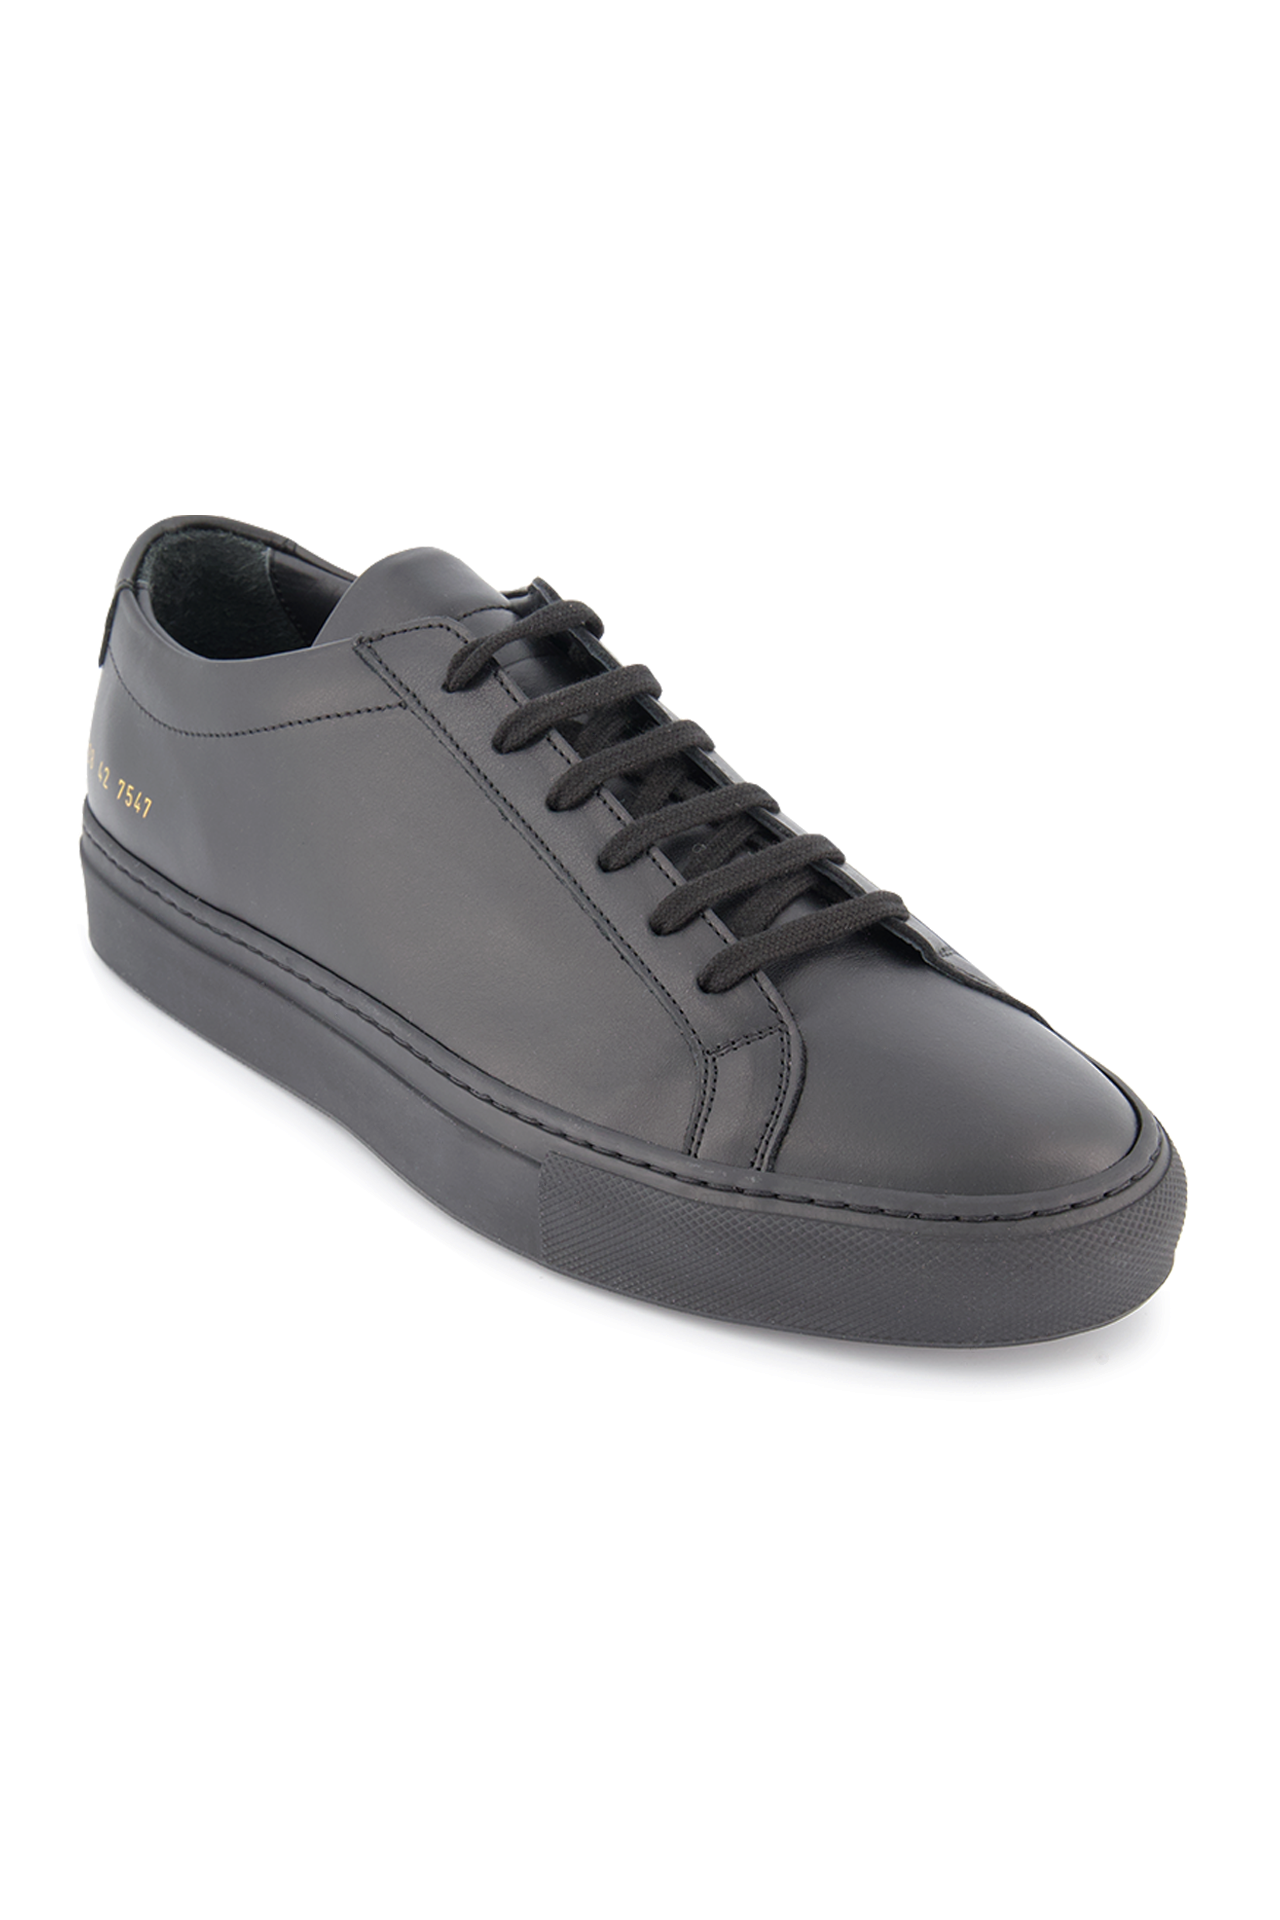 Front angled view image of Common Projects Original Achilles Low Sneaker Leather Black (600678727691)